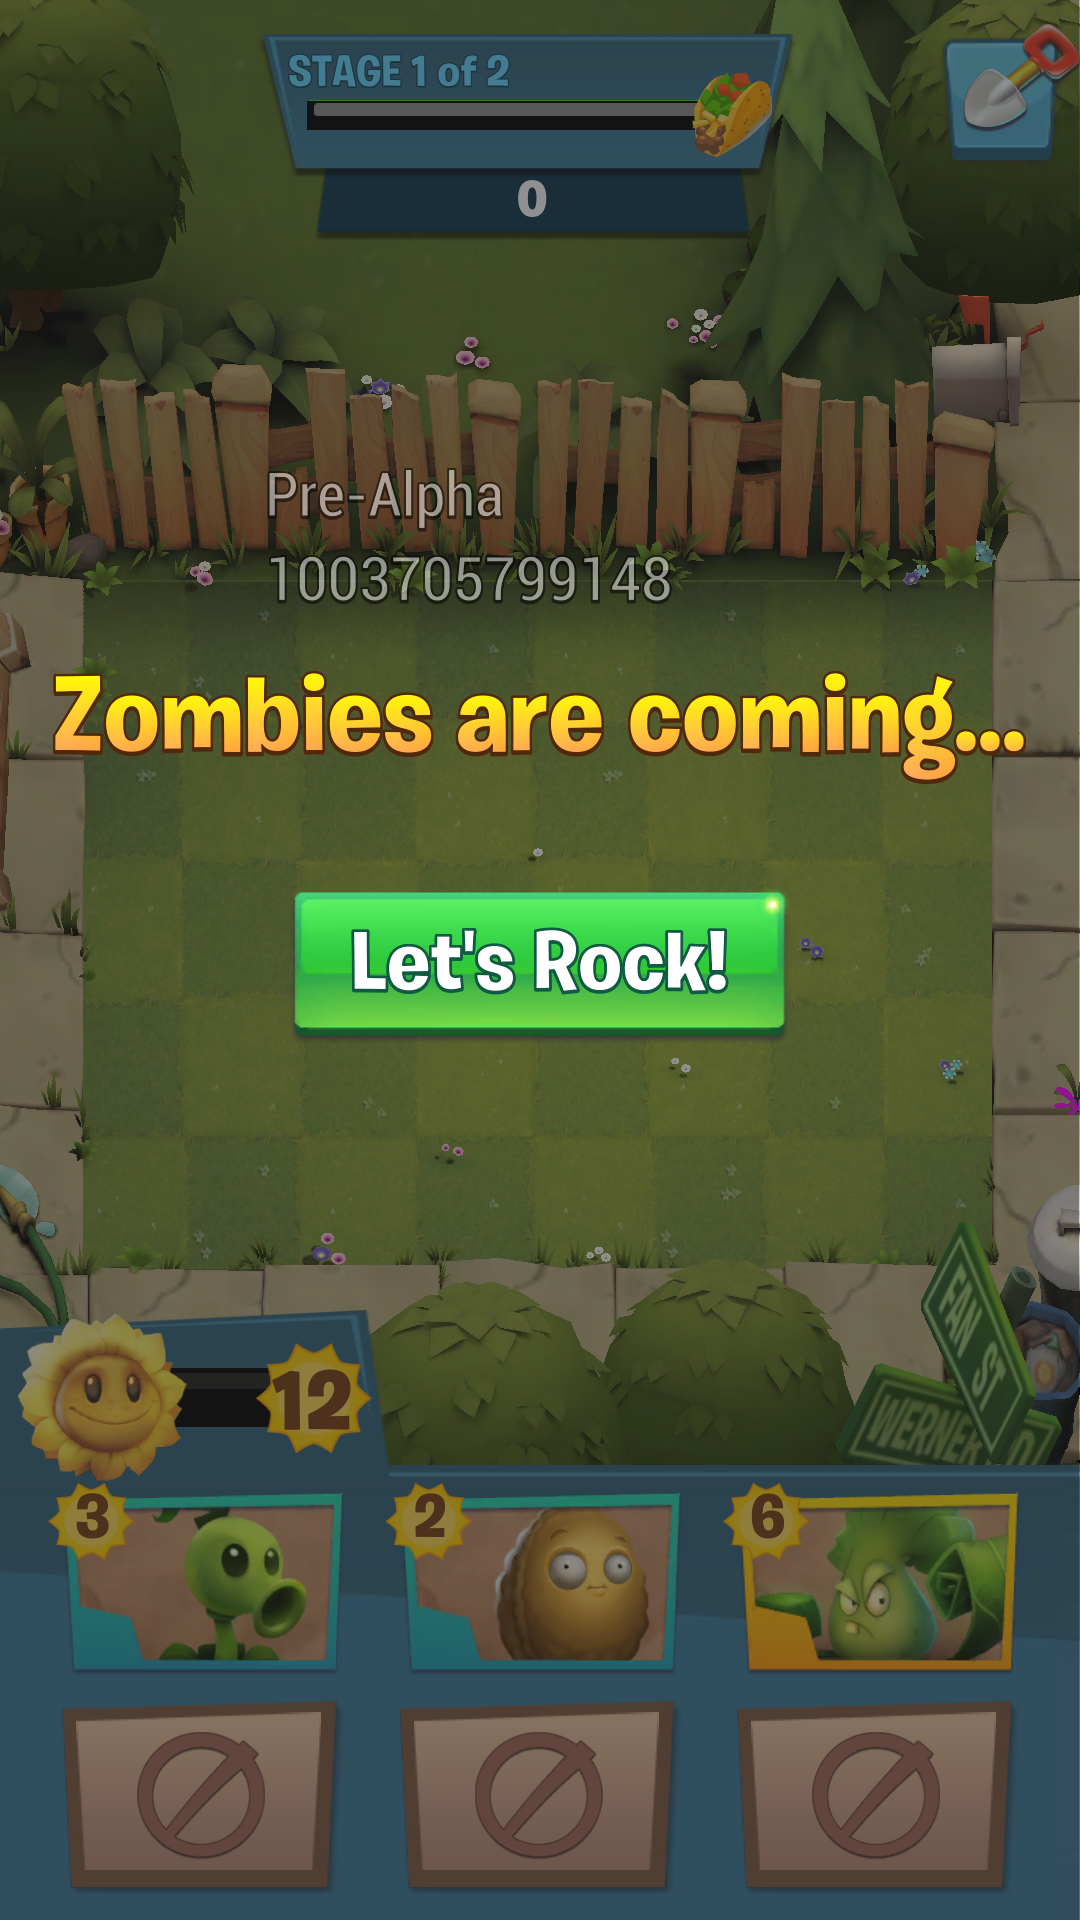 Plants vs Zombies 3 pre-alpha version gets limited release on Android  devices-Tech News , Firstpost